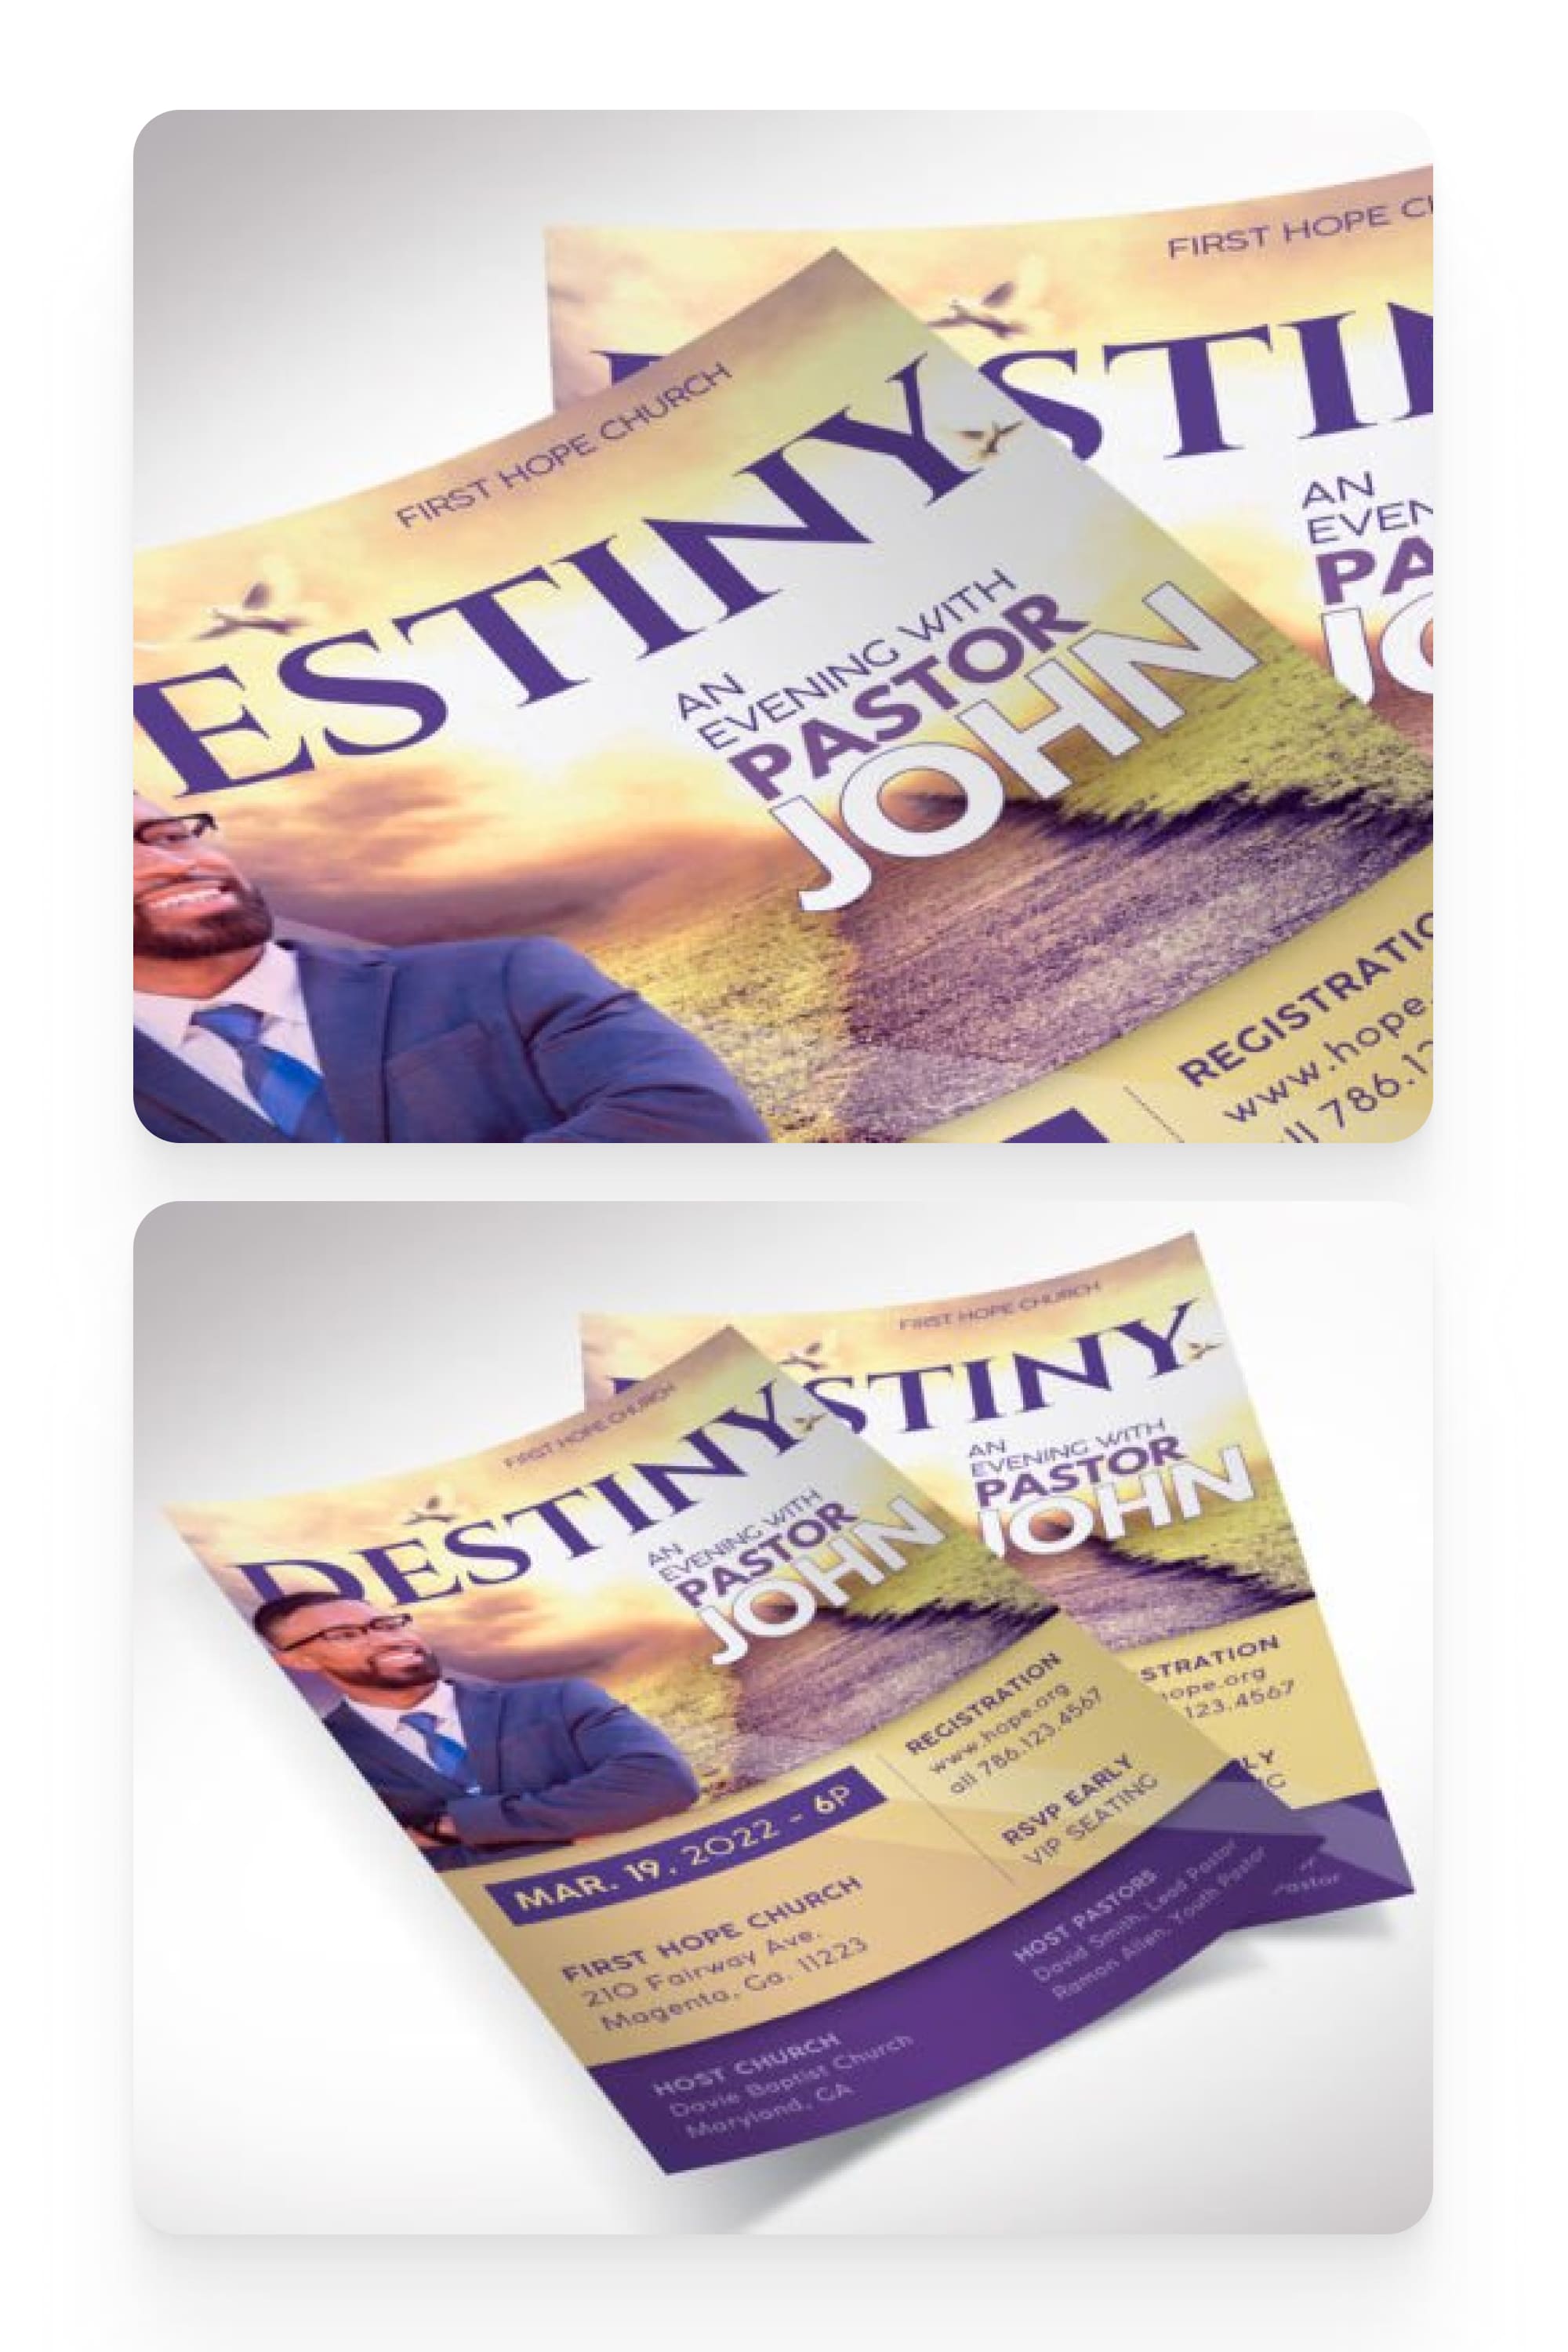 Image of a flyer with a man in a suit and a yellow-purple color scheme.